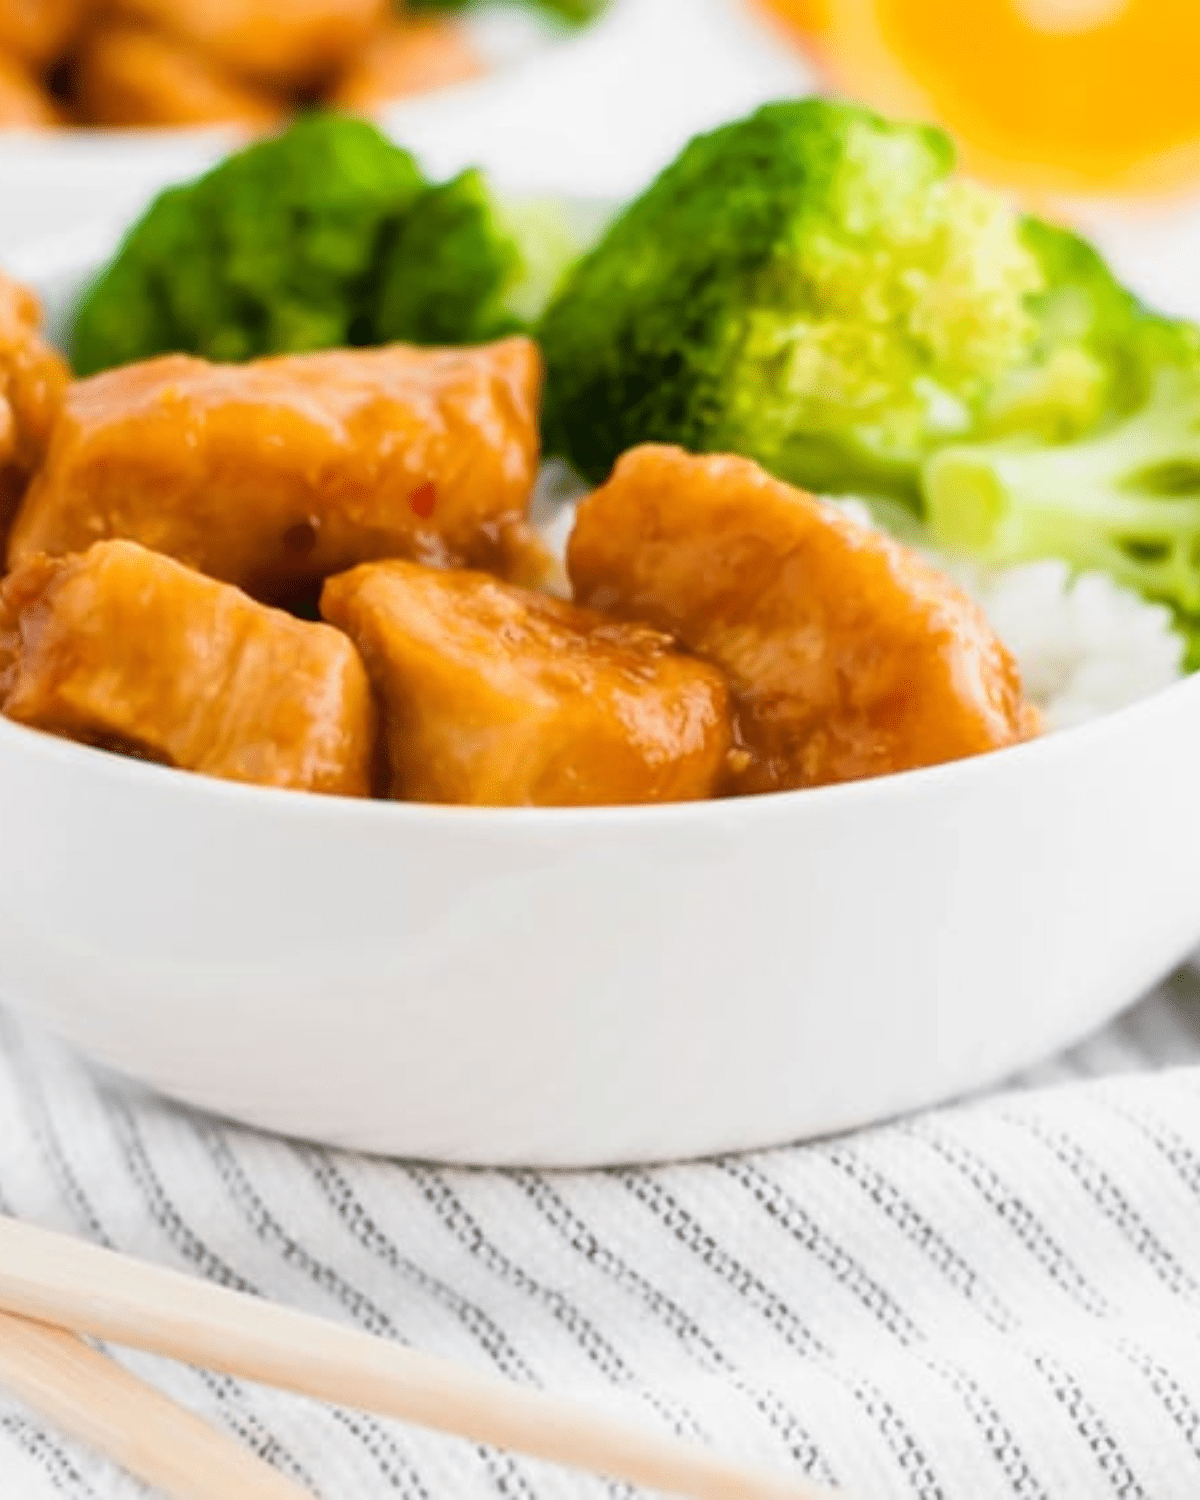 Instant pot orange chicken in a white bowl with broccoli and rice